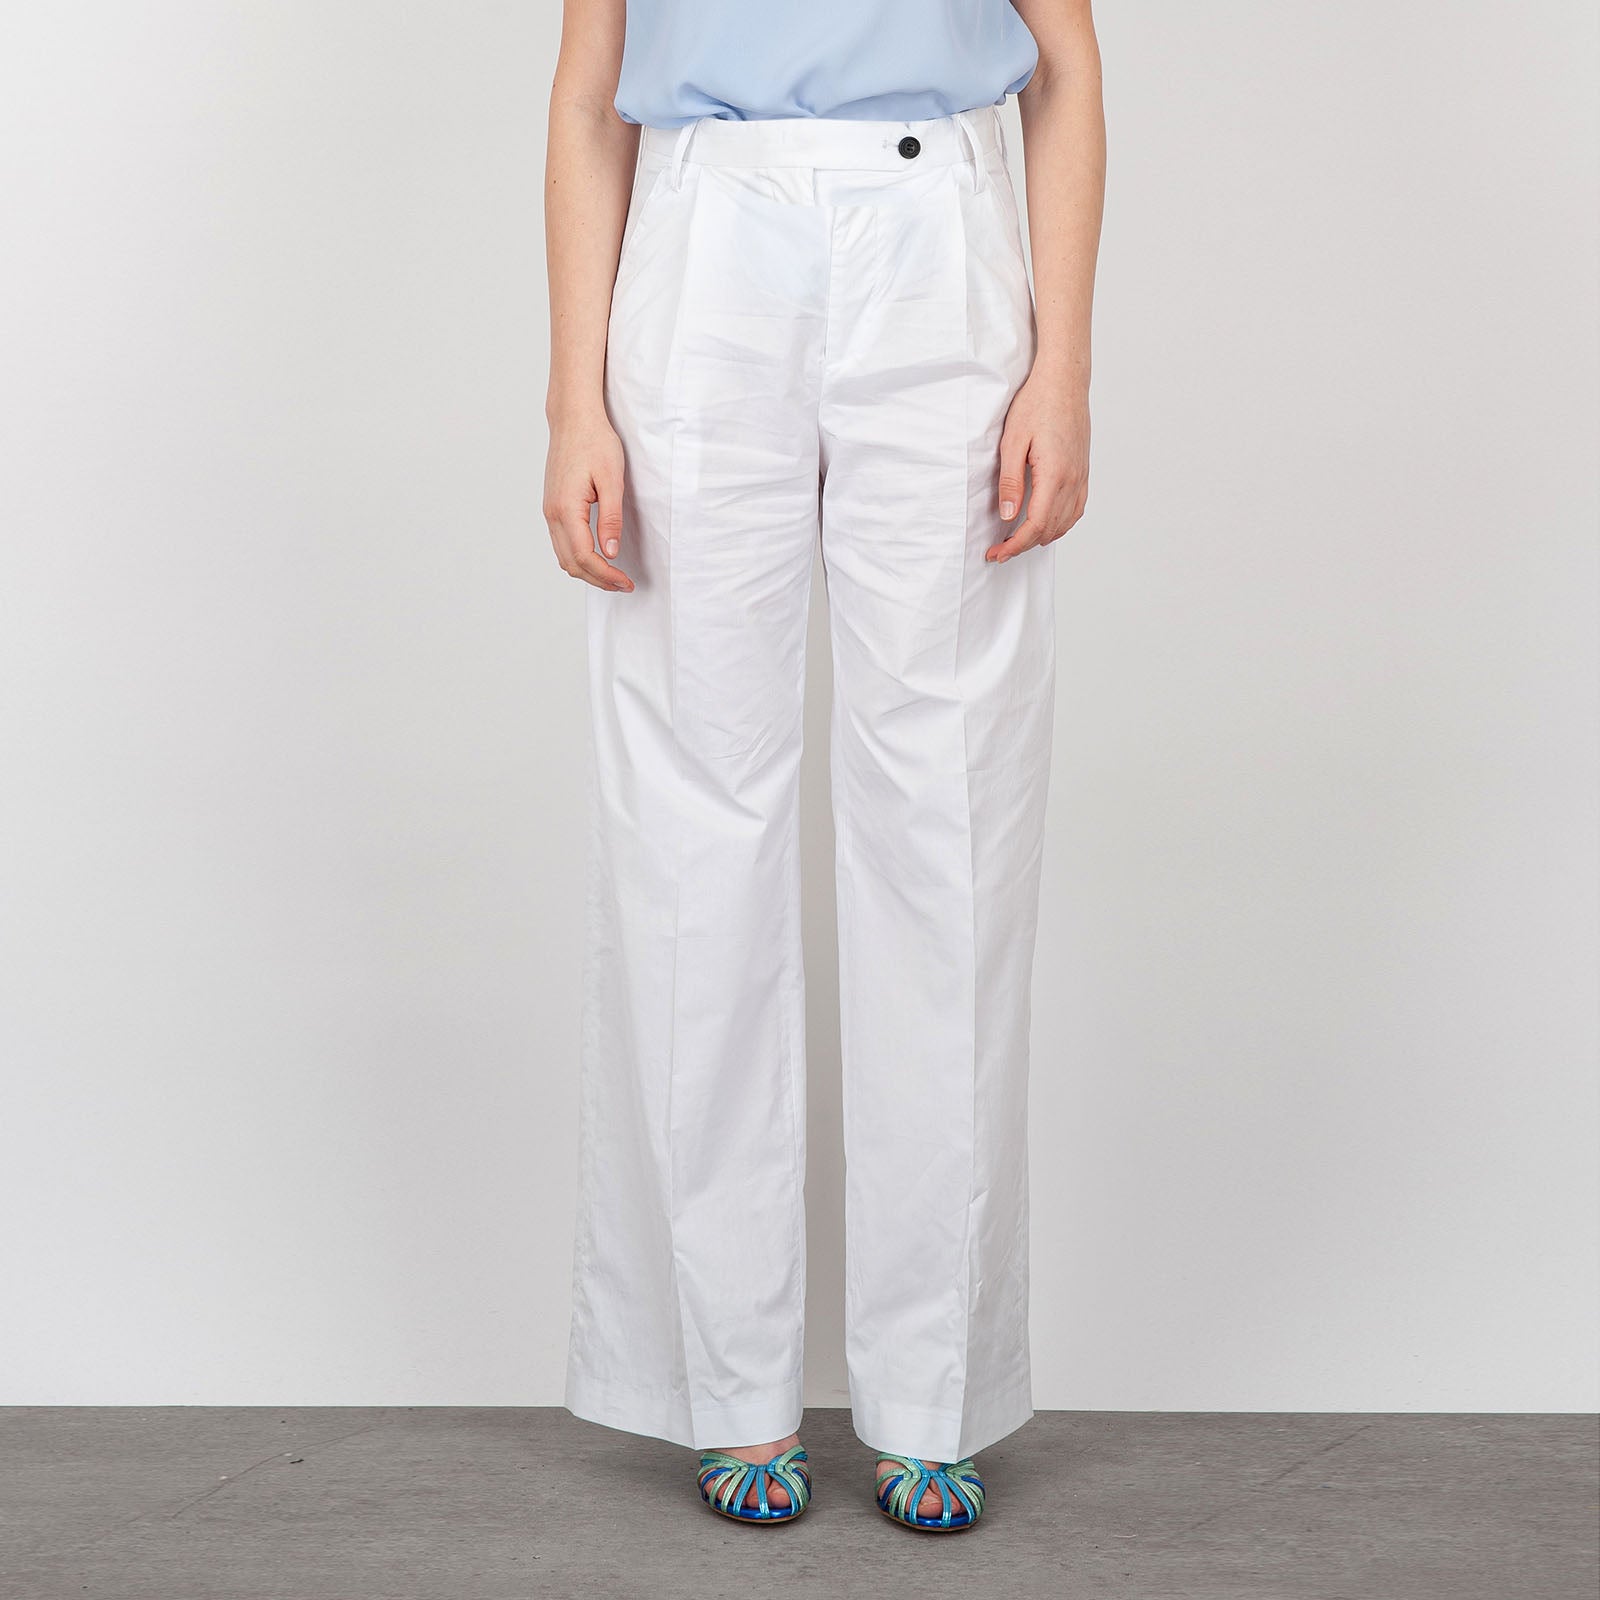 Department Five Fairmont Wide-leg Pincers Trousers in White Cotton - 6